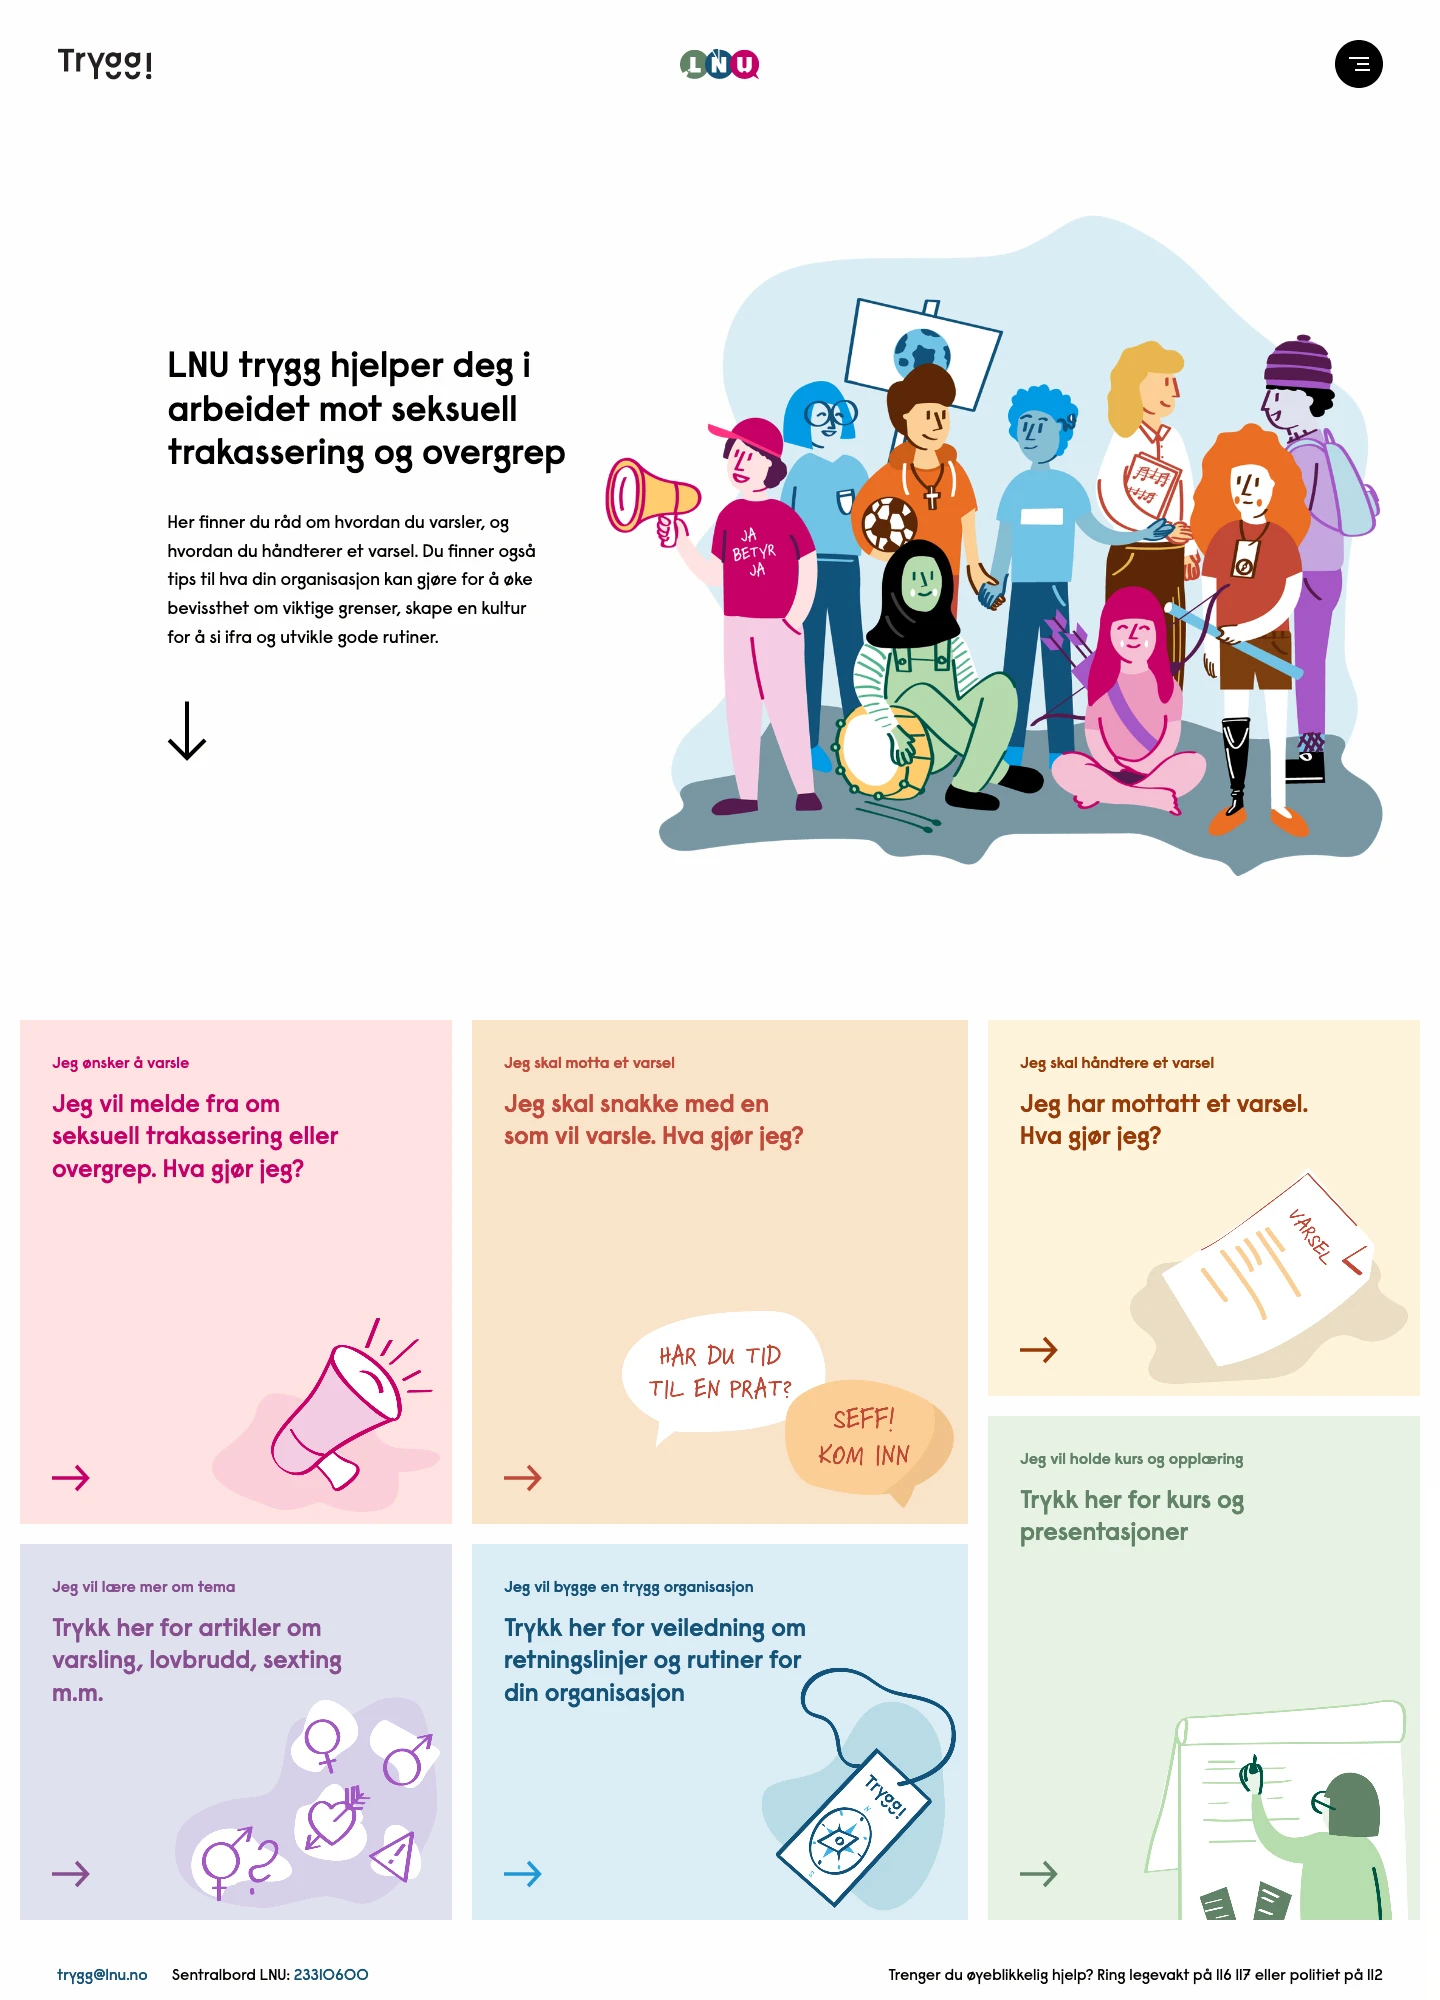 LNU Trygg! Landing Page Example: LNU Trygg! helps you in your work against sexual harassment and abuse. Here you will find advice on how to notify and how to handle an alert. You'll also find tips on what your organization can do to raise awareness of important boundaries, create a culture of speaking out and develop good routines.